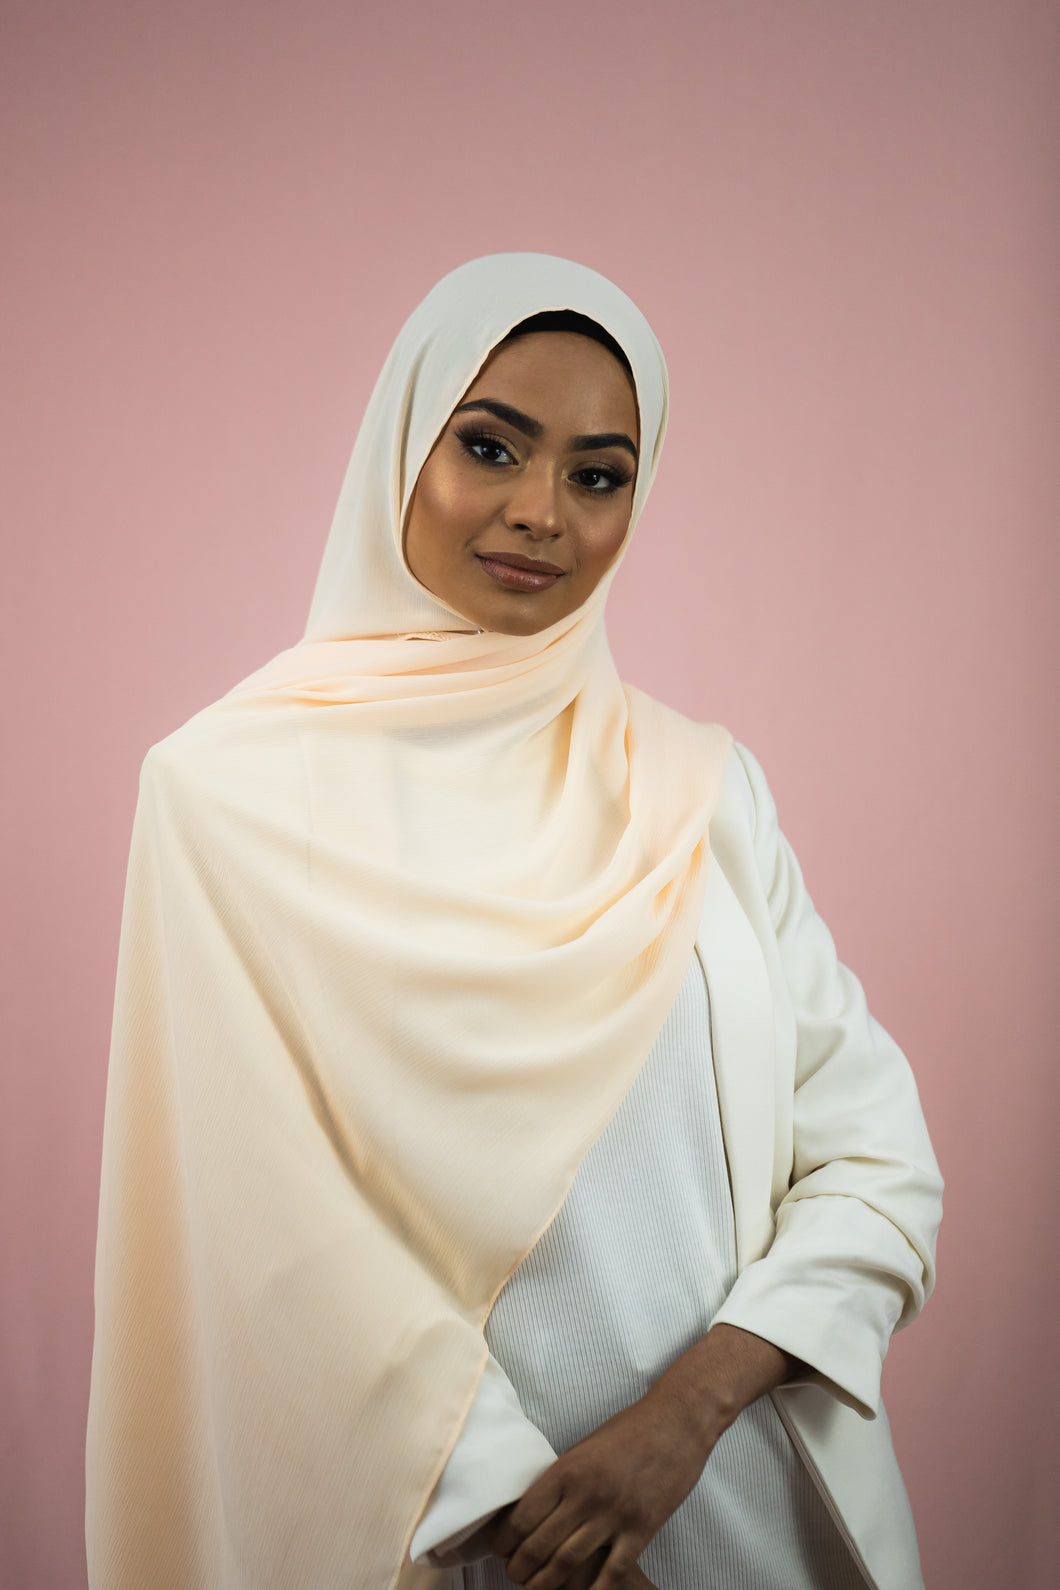 The Apricot Crinkle Chiffon Hijab Scarf by Suriah Scarves